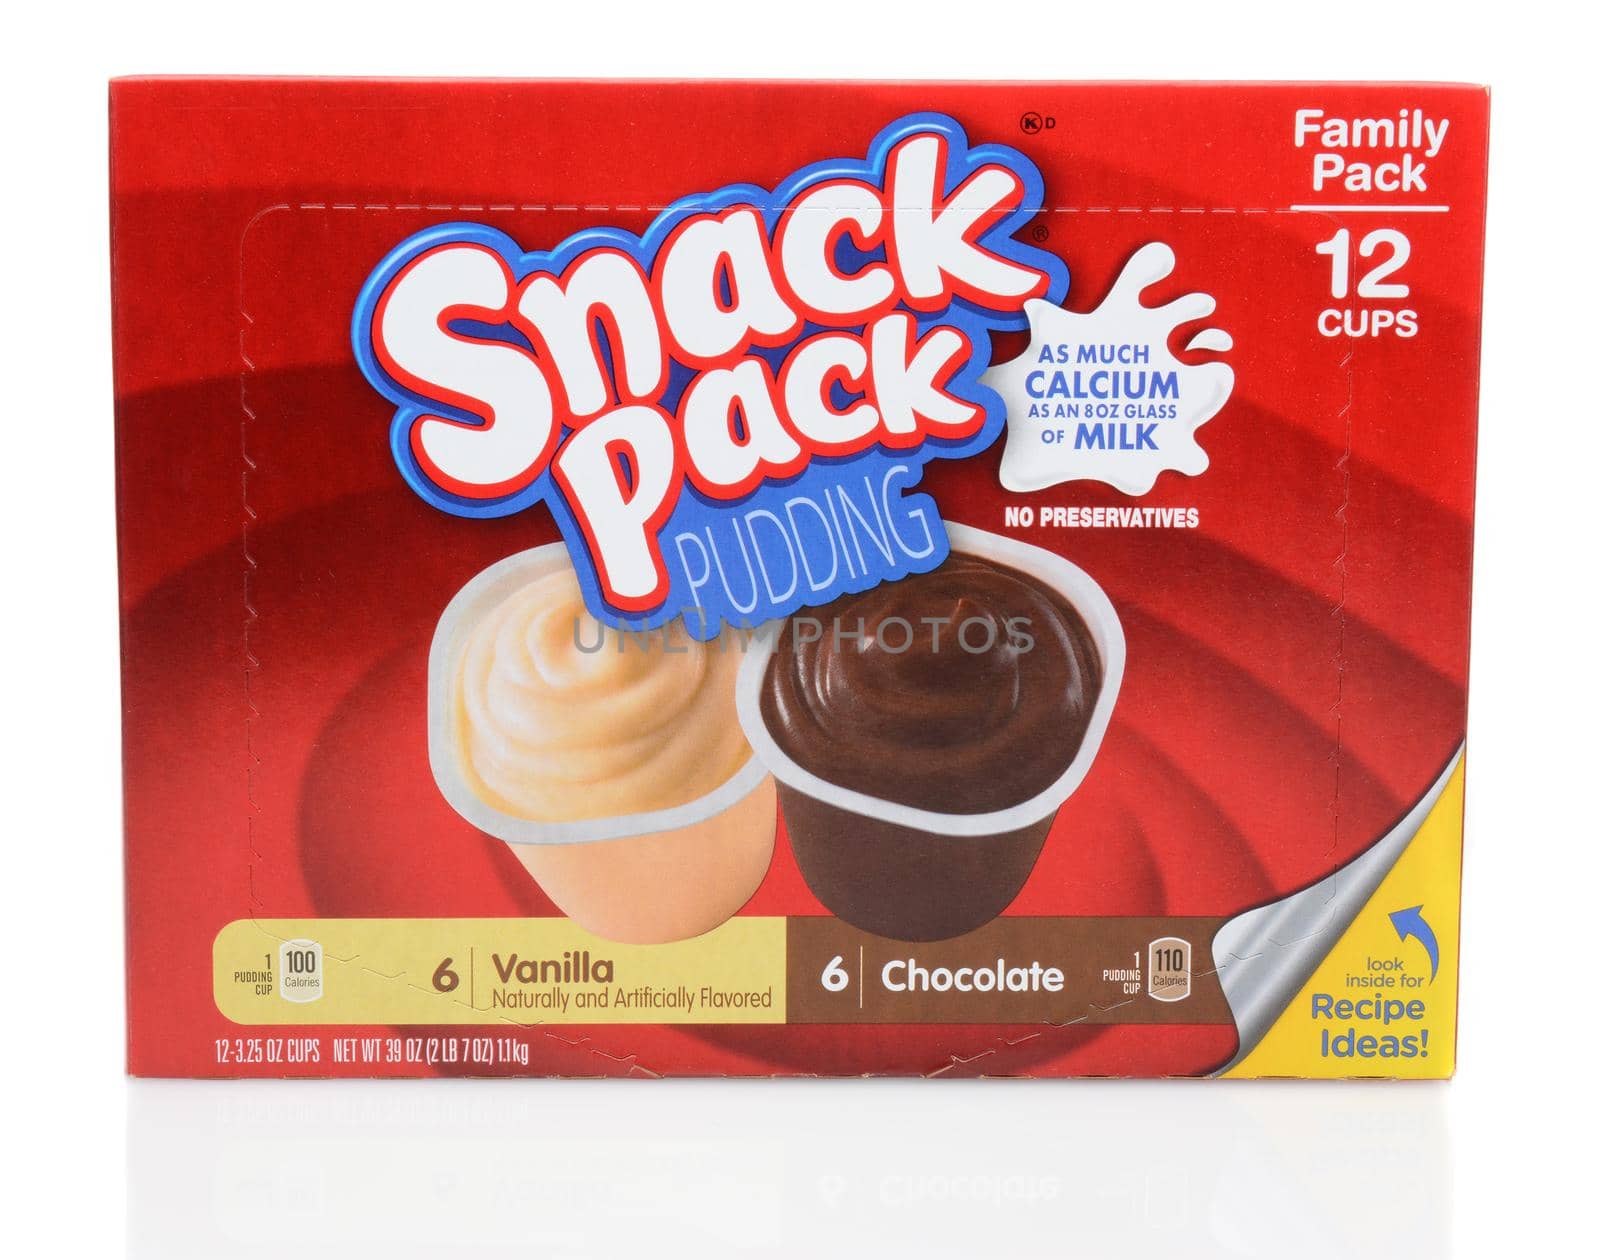 IRVINE, CA - SEPTEMBER 12, 2014: A box of Snack Pack Pudding. Snack Pack was introduced in 1968 as a shelf-stable pudding in single-serve containers.